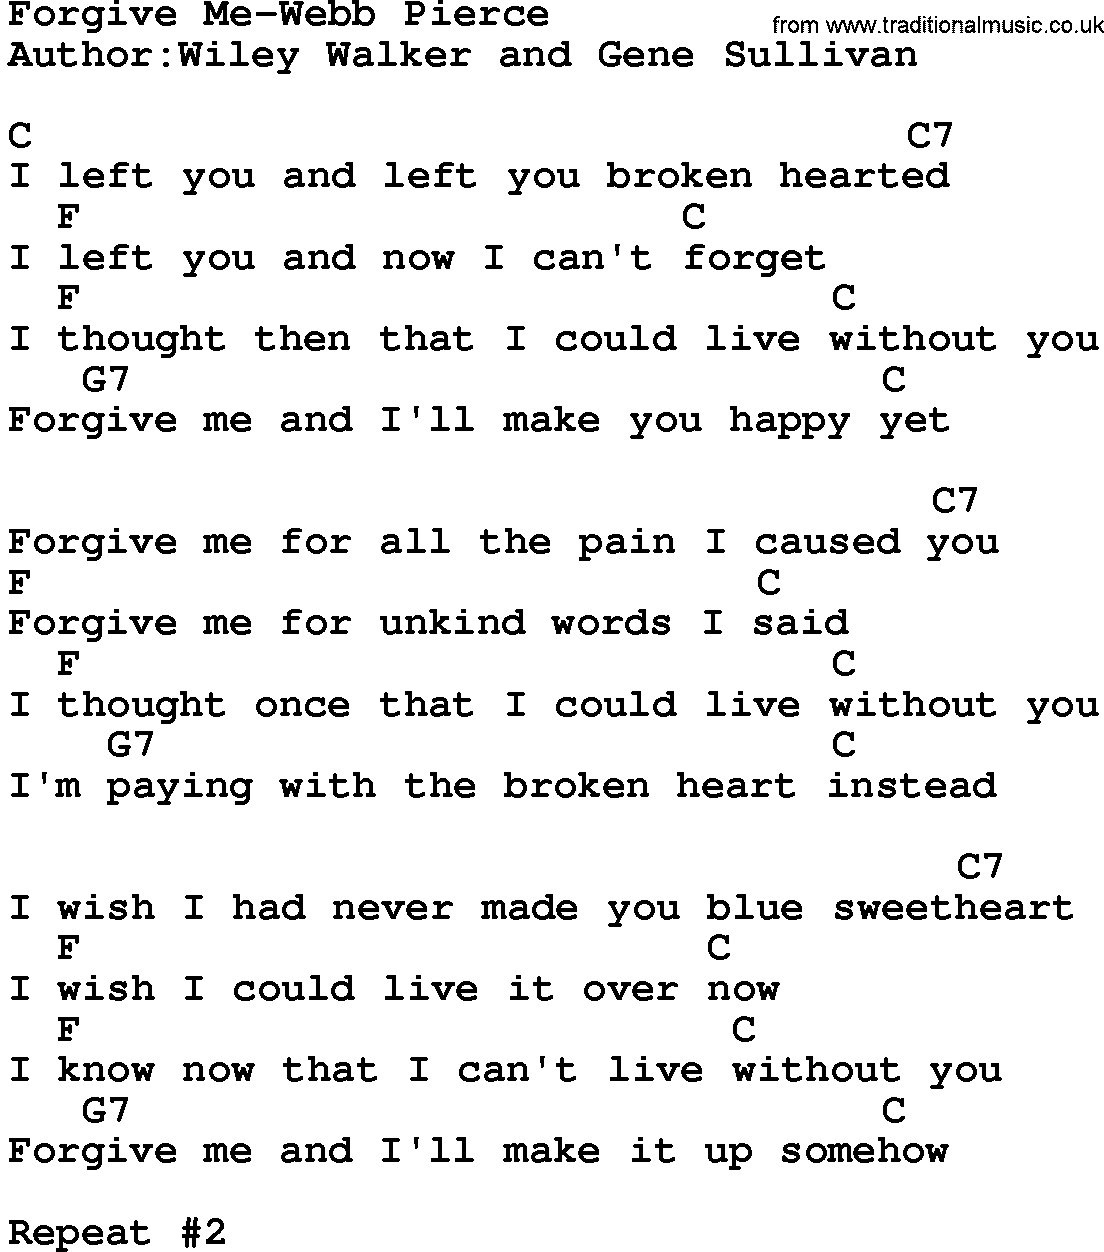 Country music song: Forgive Me-Webb Pierce lyrics and chords